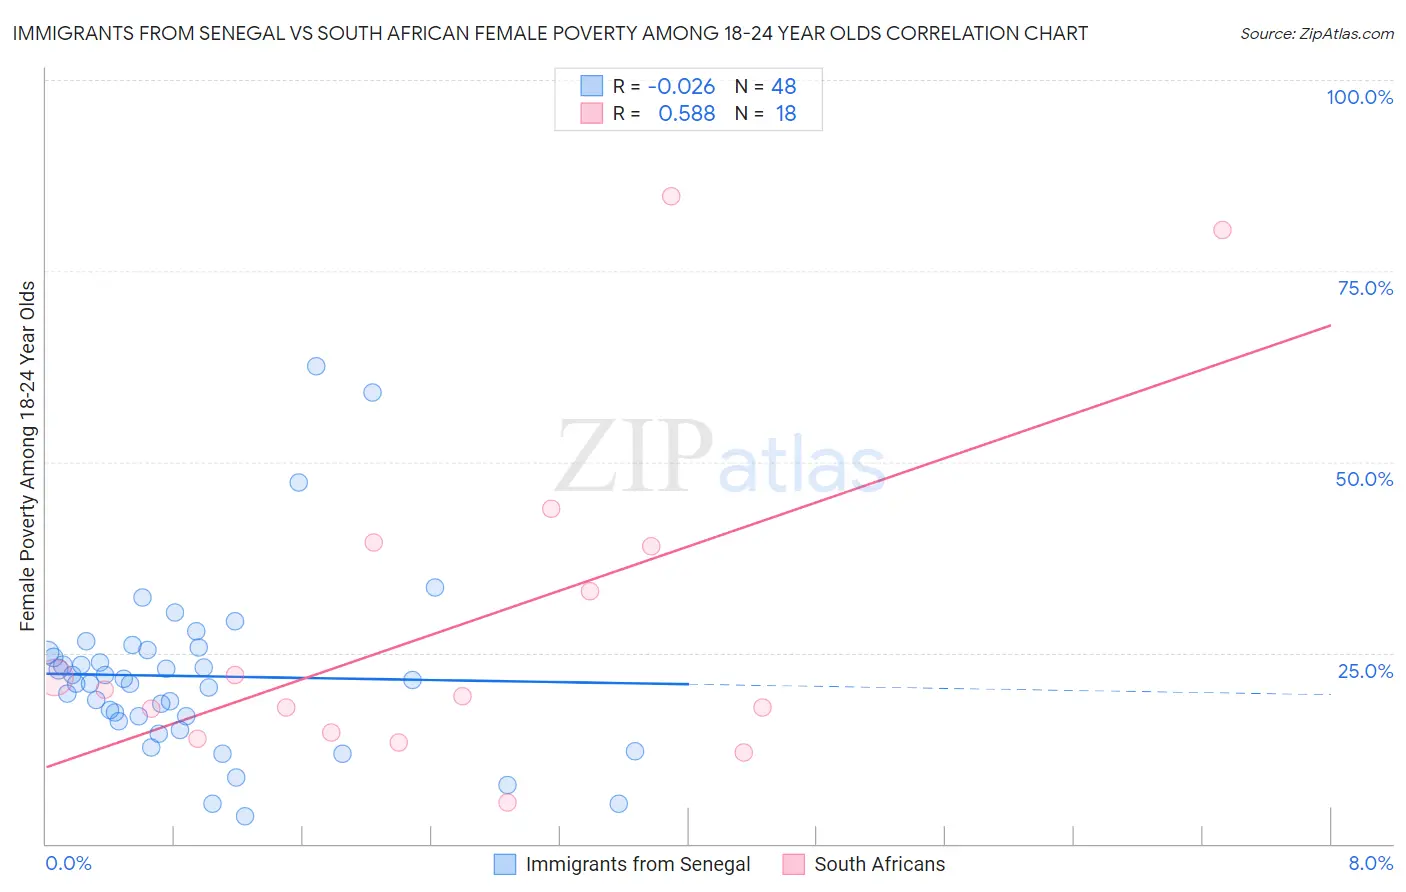 Immigrants from Senegal vs South African Female Poverty Among 18-24 Year Olds